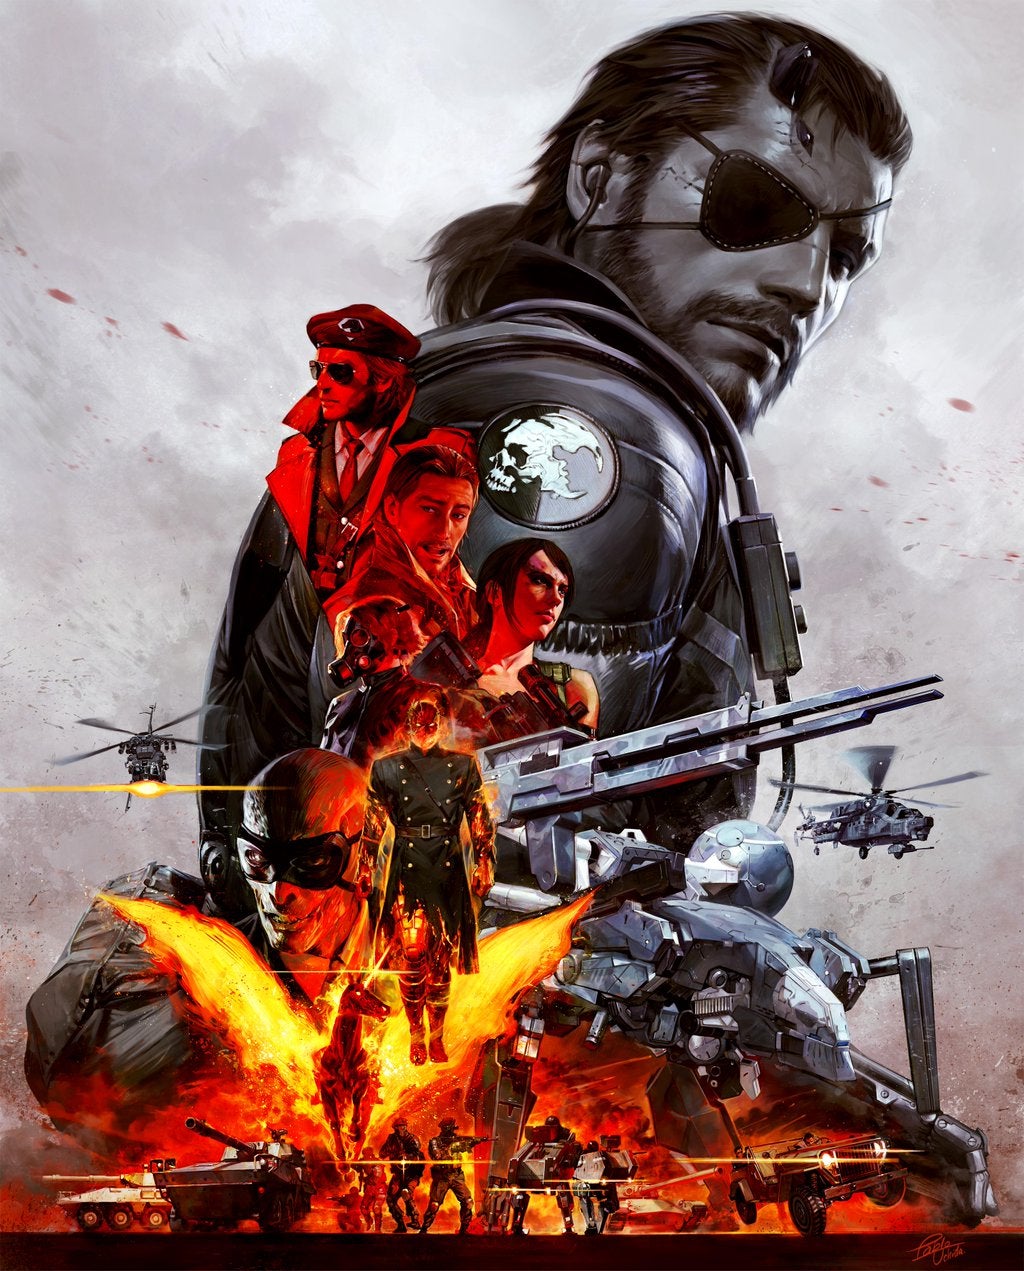 Image for Metal Gear Solid 5: The Definitive Experience is out in October, includes Ground Zeroes and The Phantom Pain